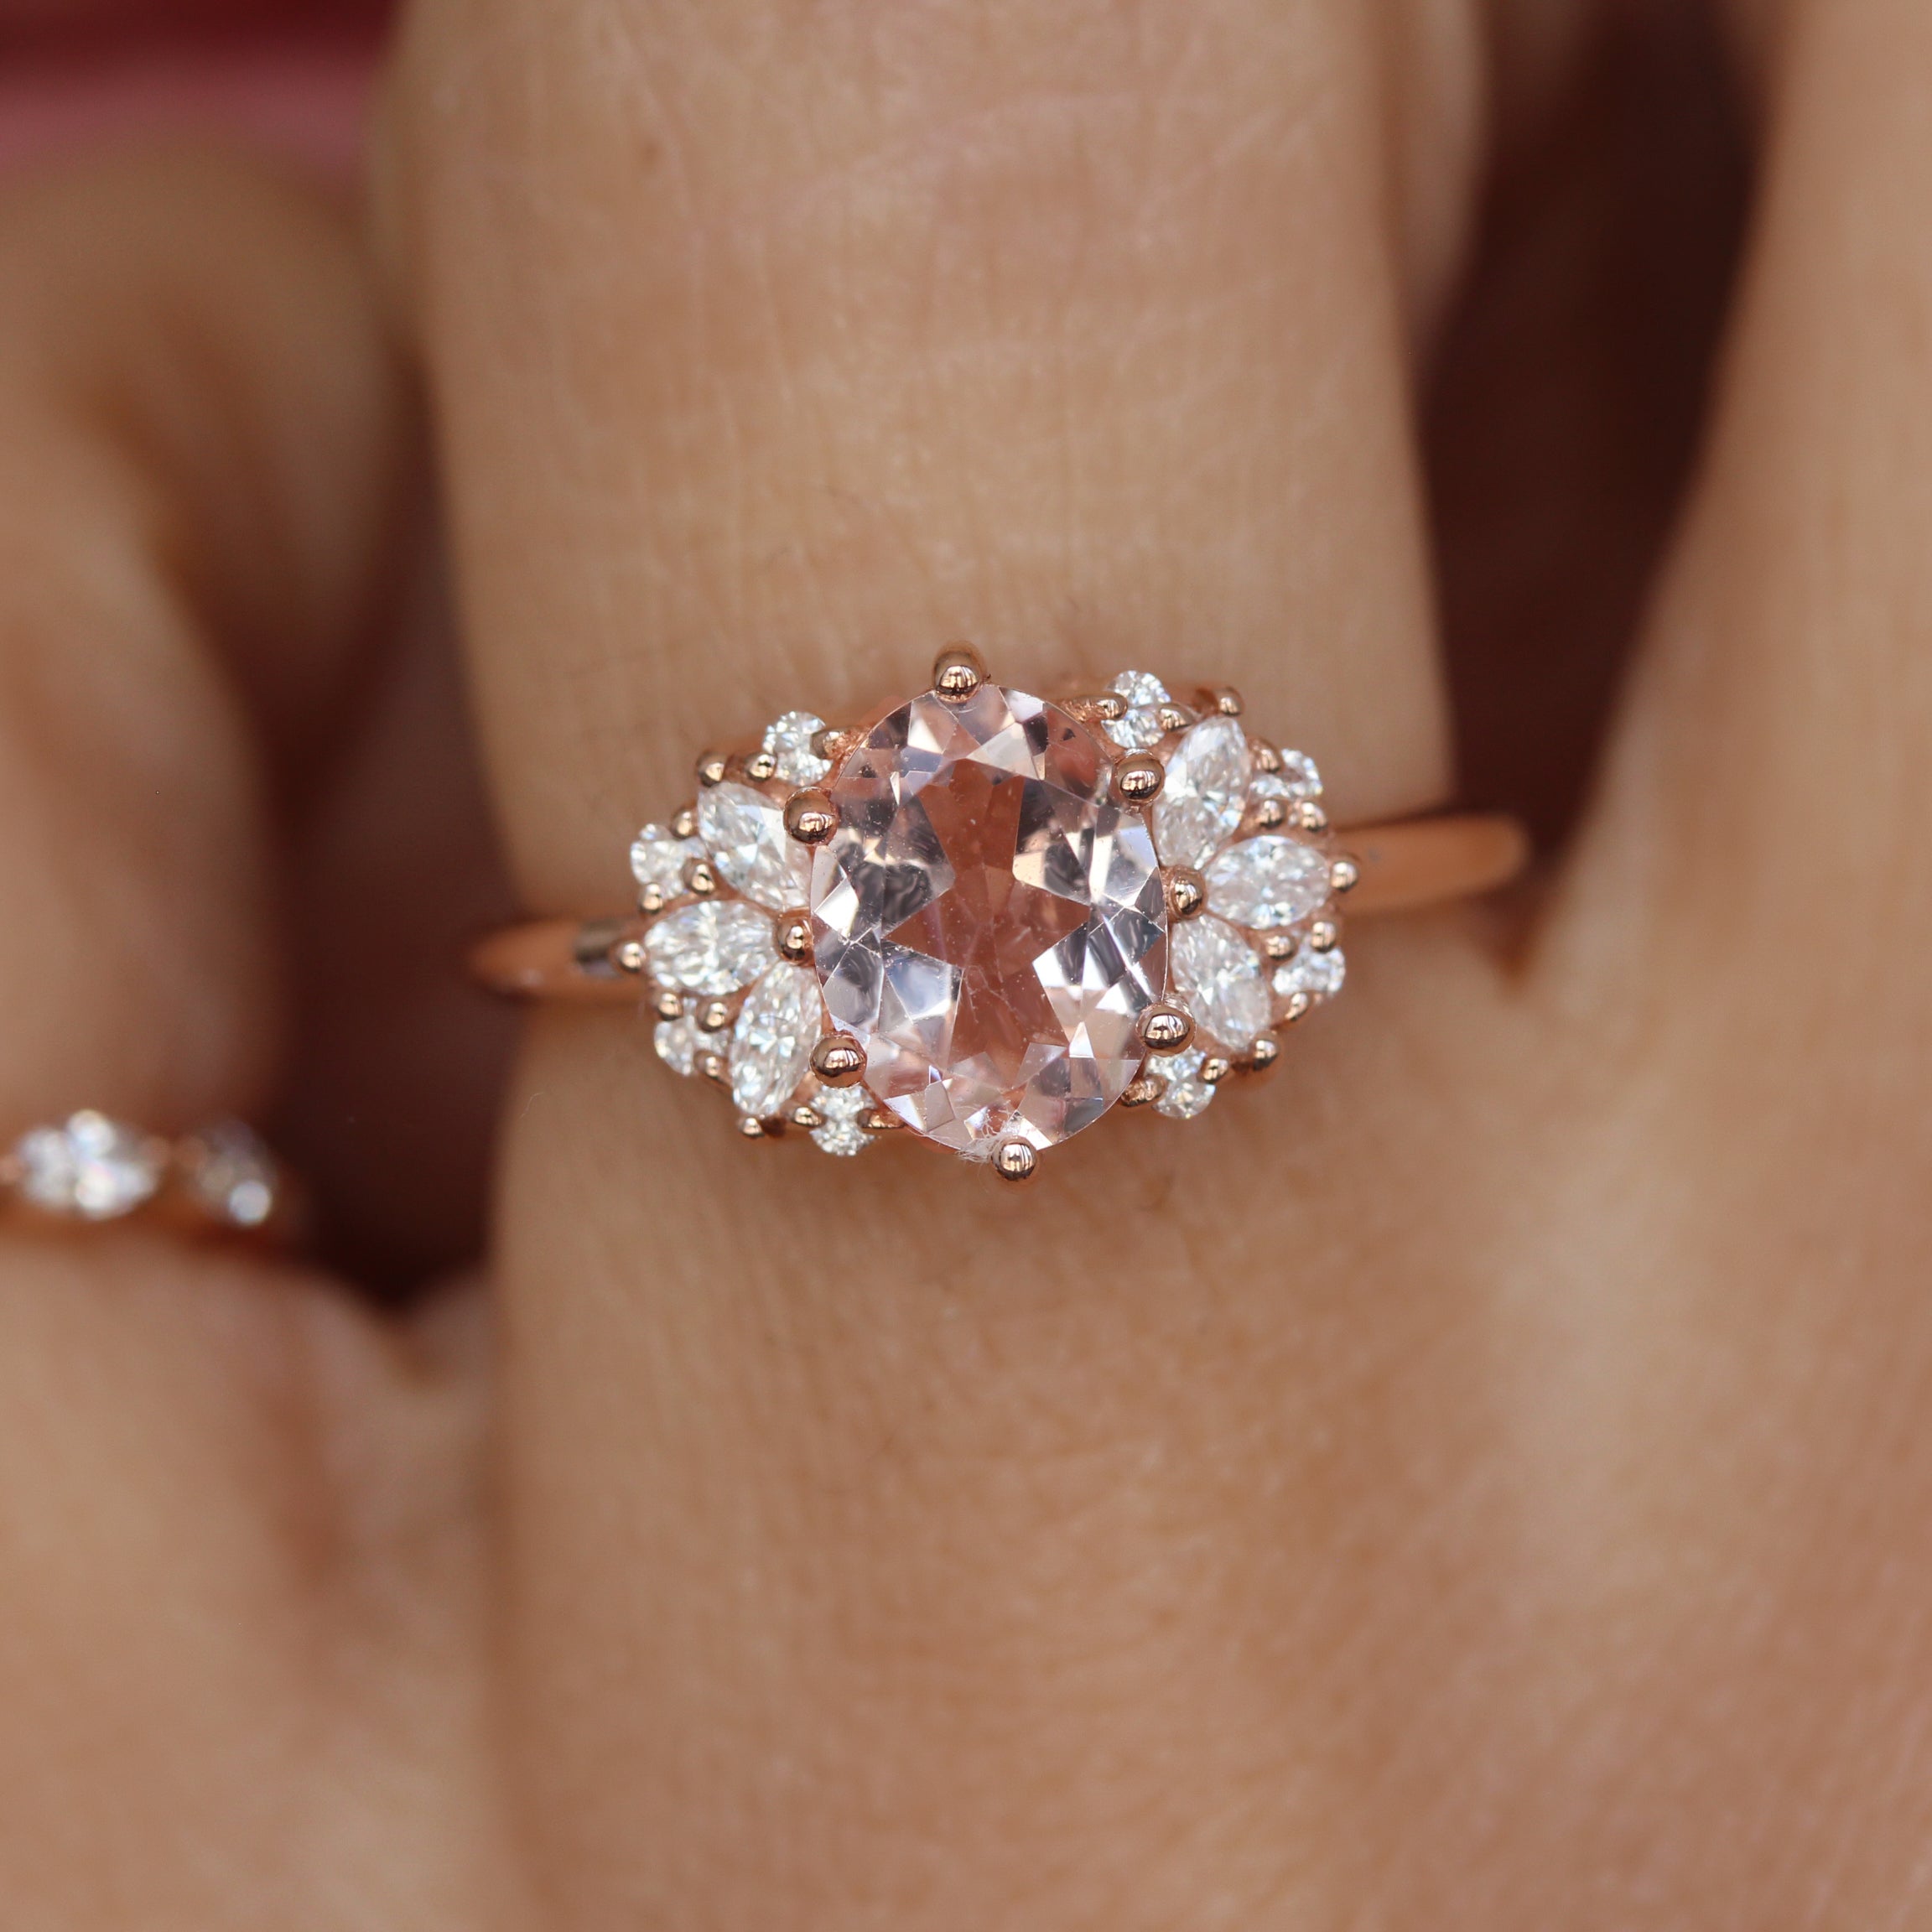 Oval Morganite and Marquise Diamonds Engagement Ring, 14K Rose Gold, "Rosalia", READY TO SHIP! ♥